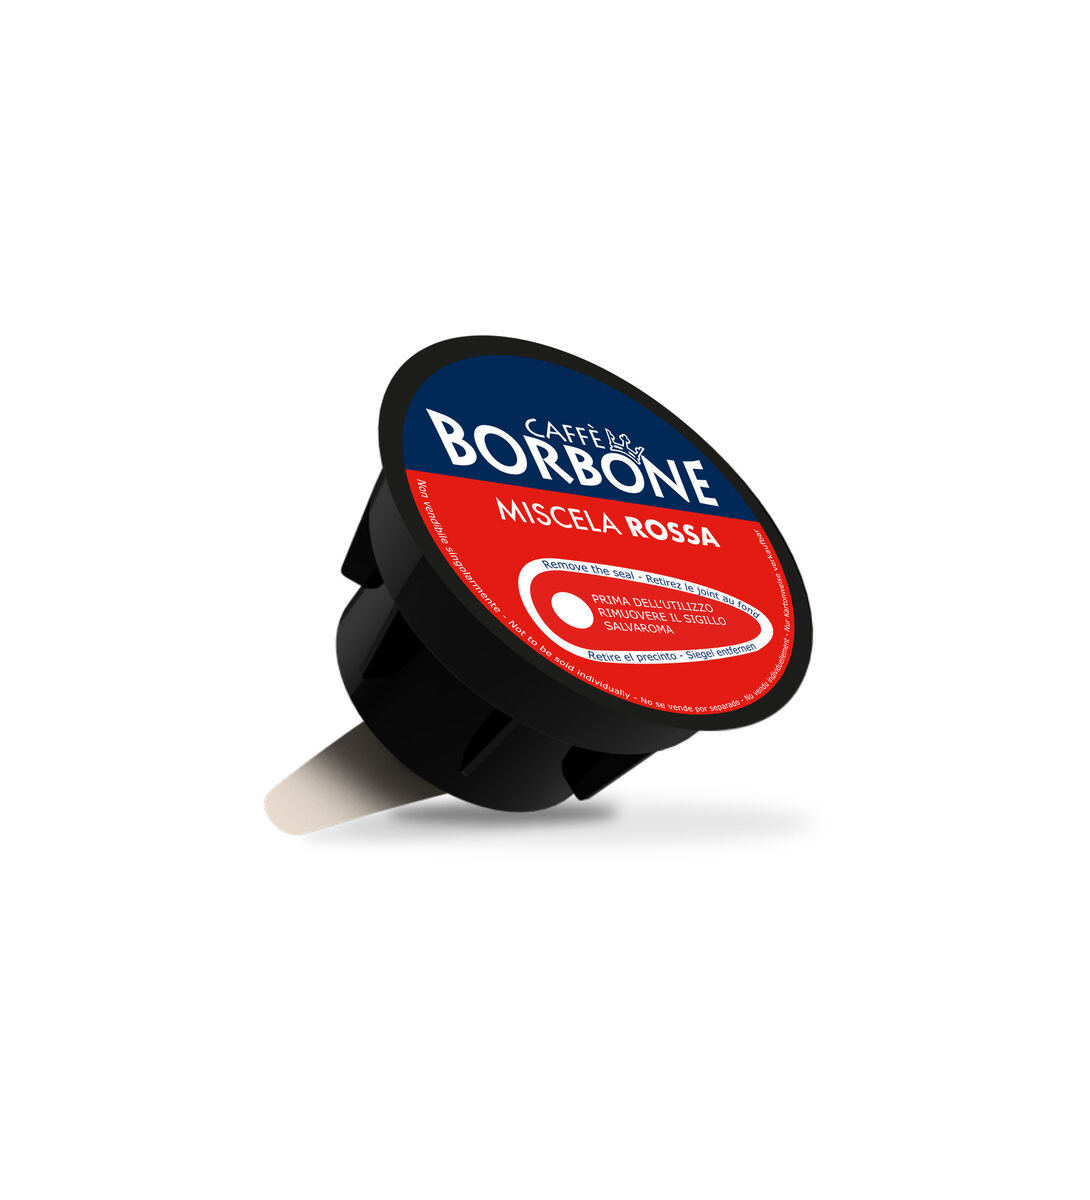 90 Borbone DolceRE RED Capsules Compatible with Nescafé®* Dolce Gusto®*  brand machines